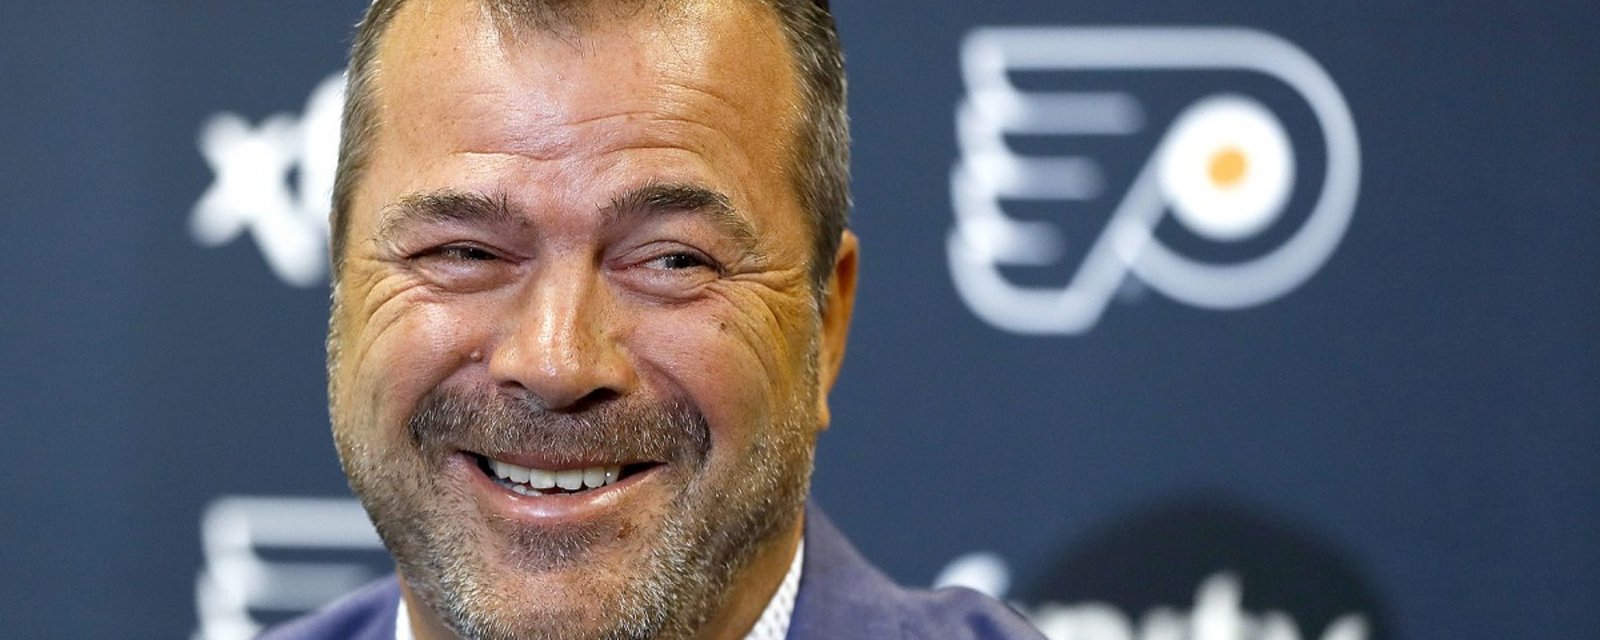 Alain Vigneault responds to criticism of his thoughts on the protests.